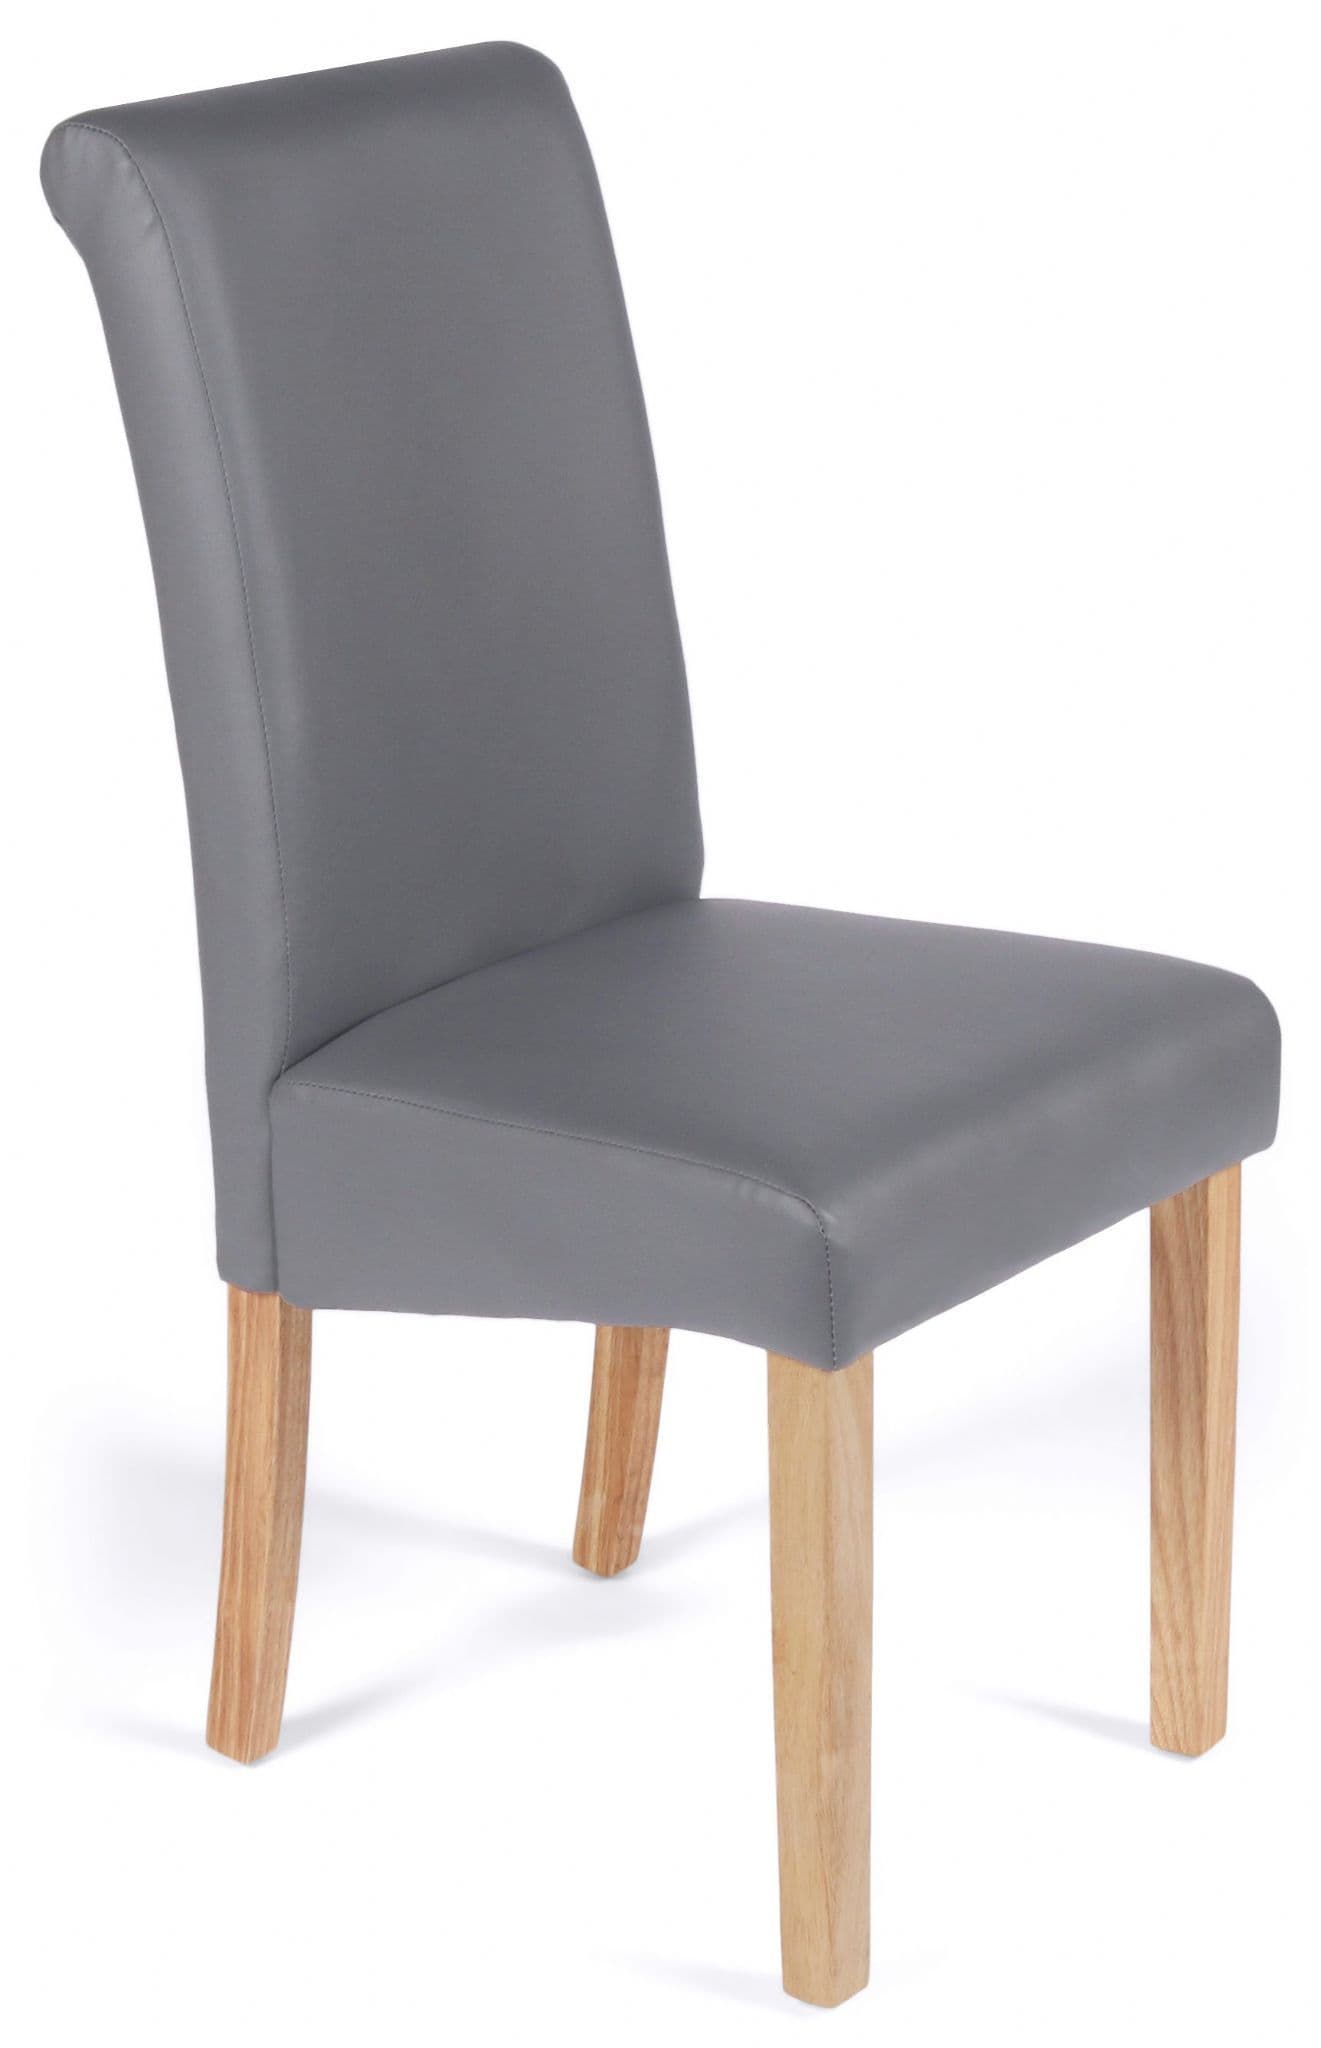 York Grey Faux Leather Chairs with Oak Legs 1/2 Price Deal Front View